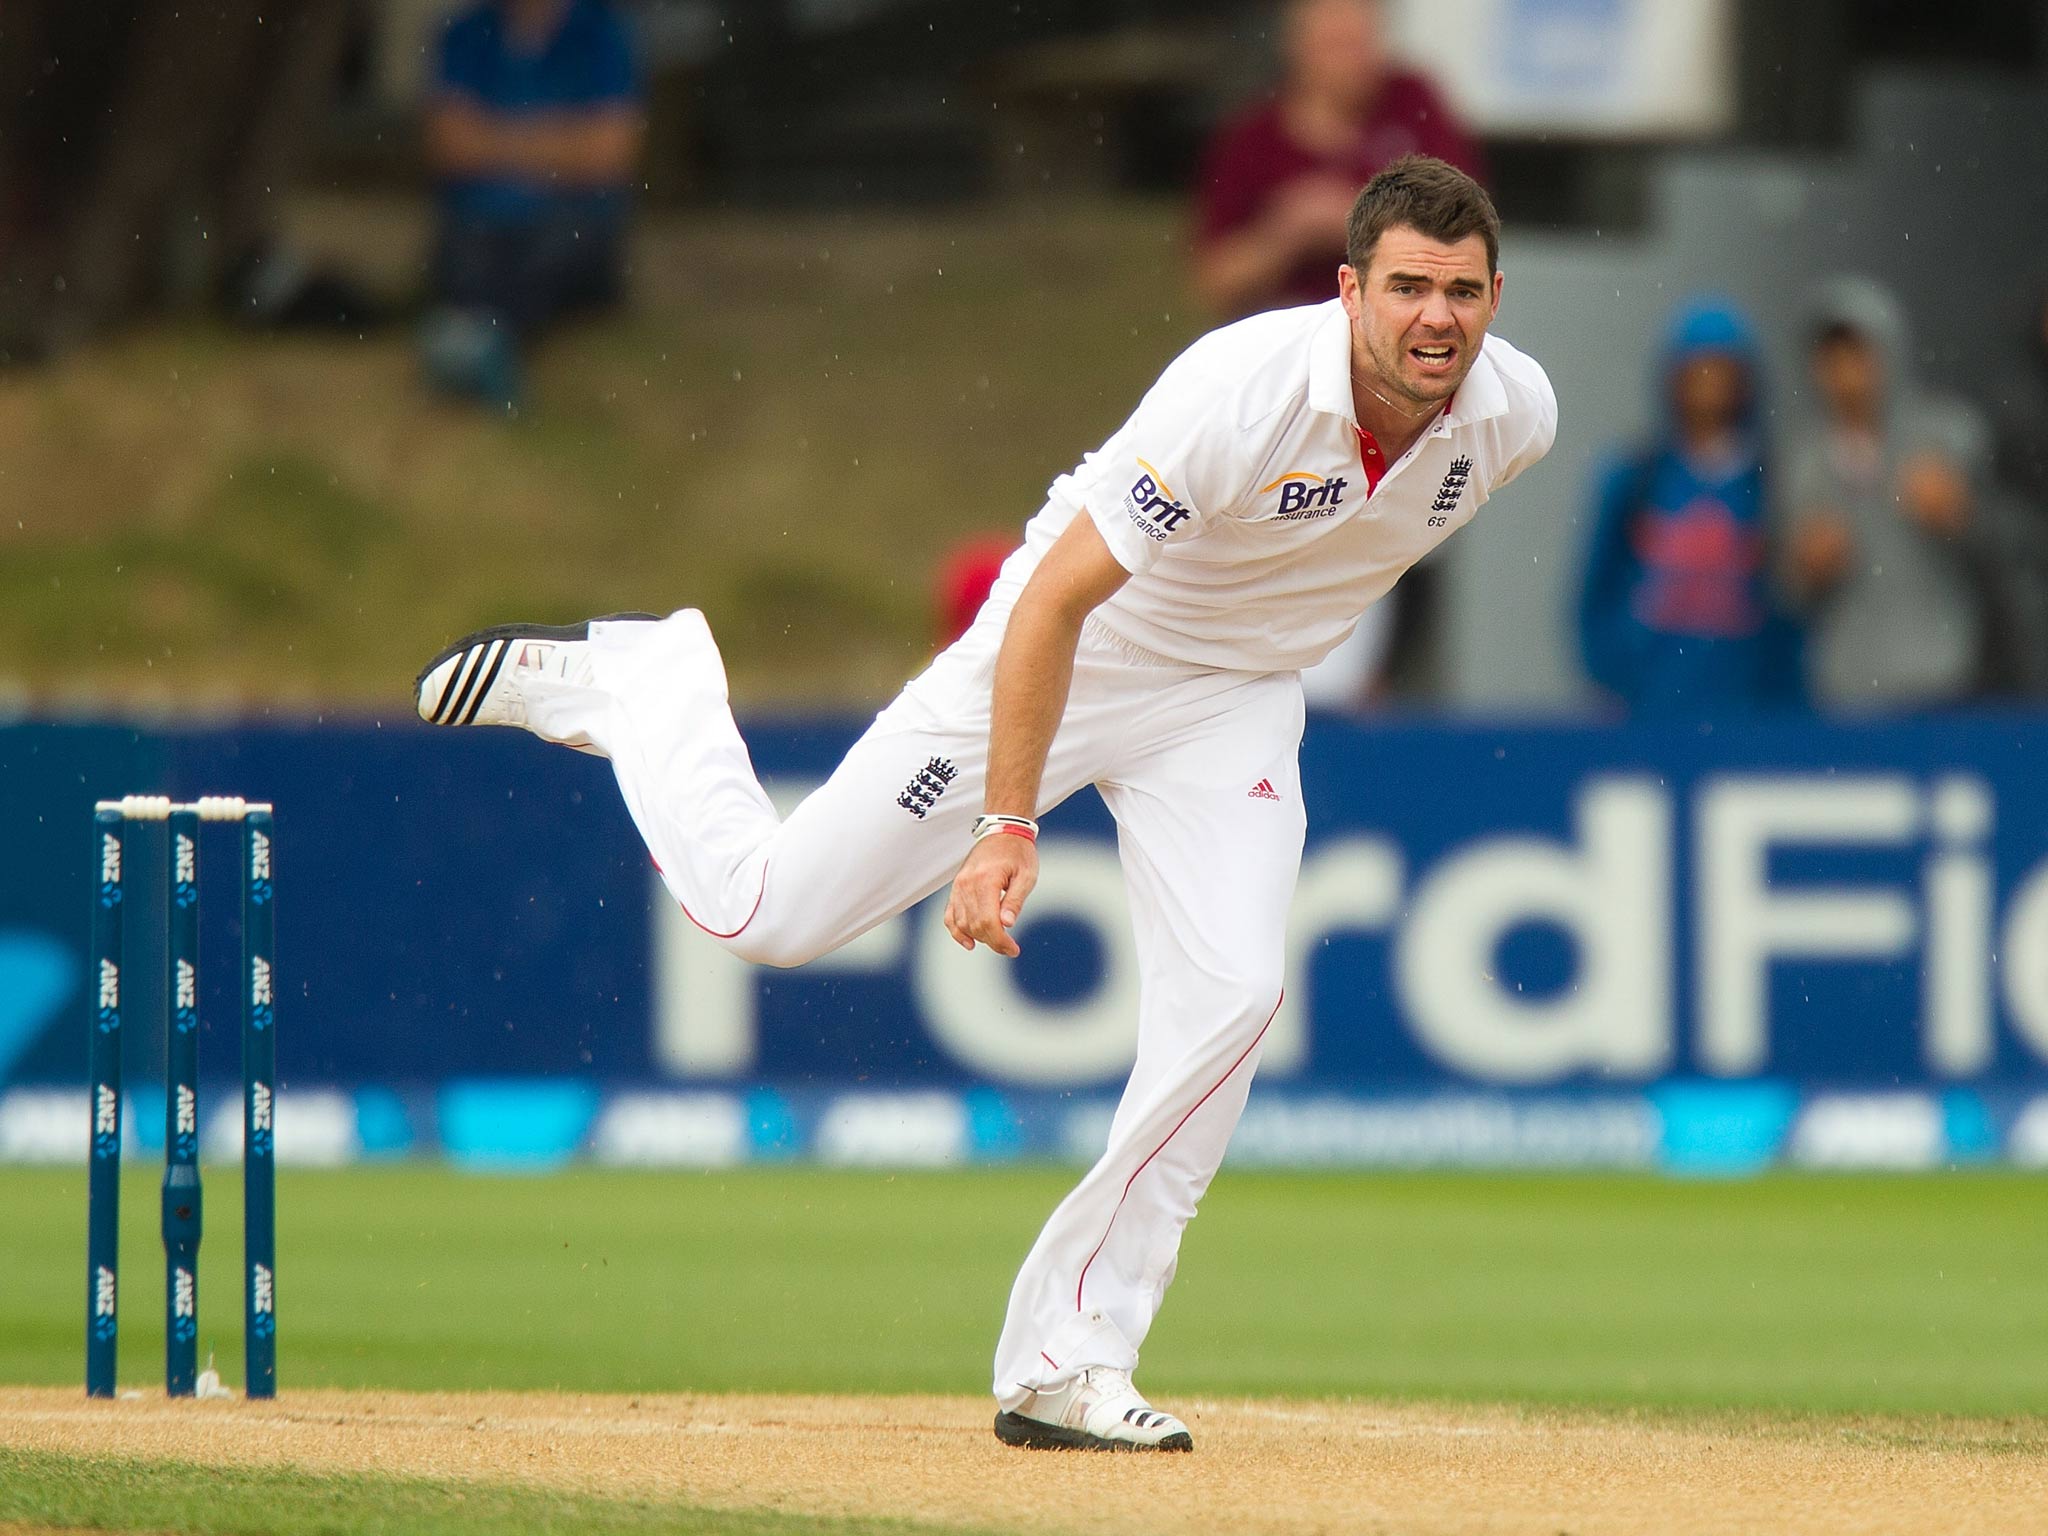 James Anderson faces more gruelling spells before reaching the big